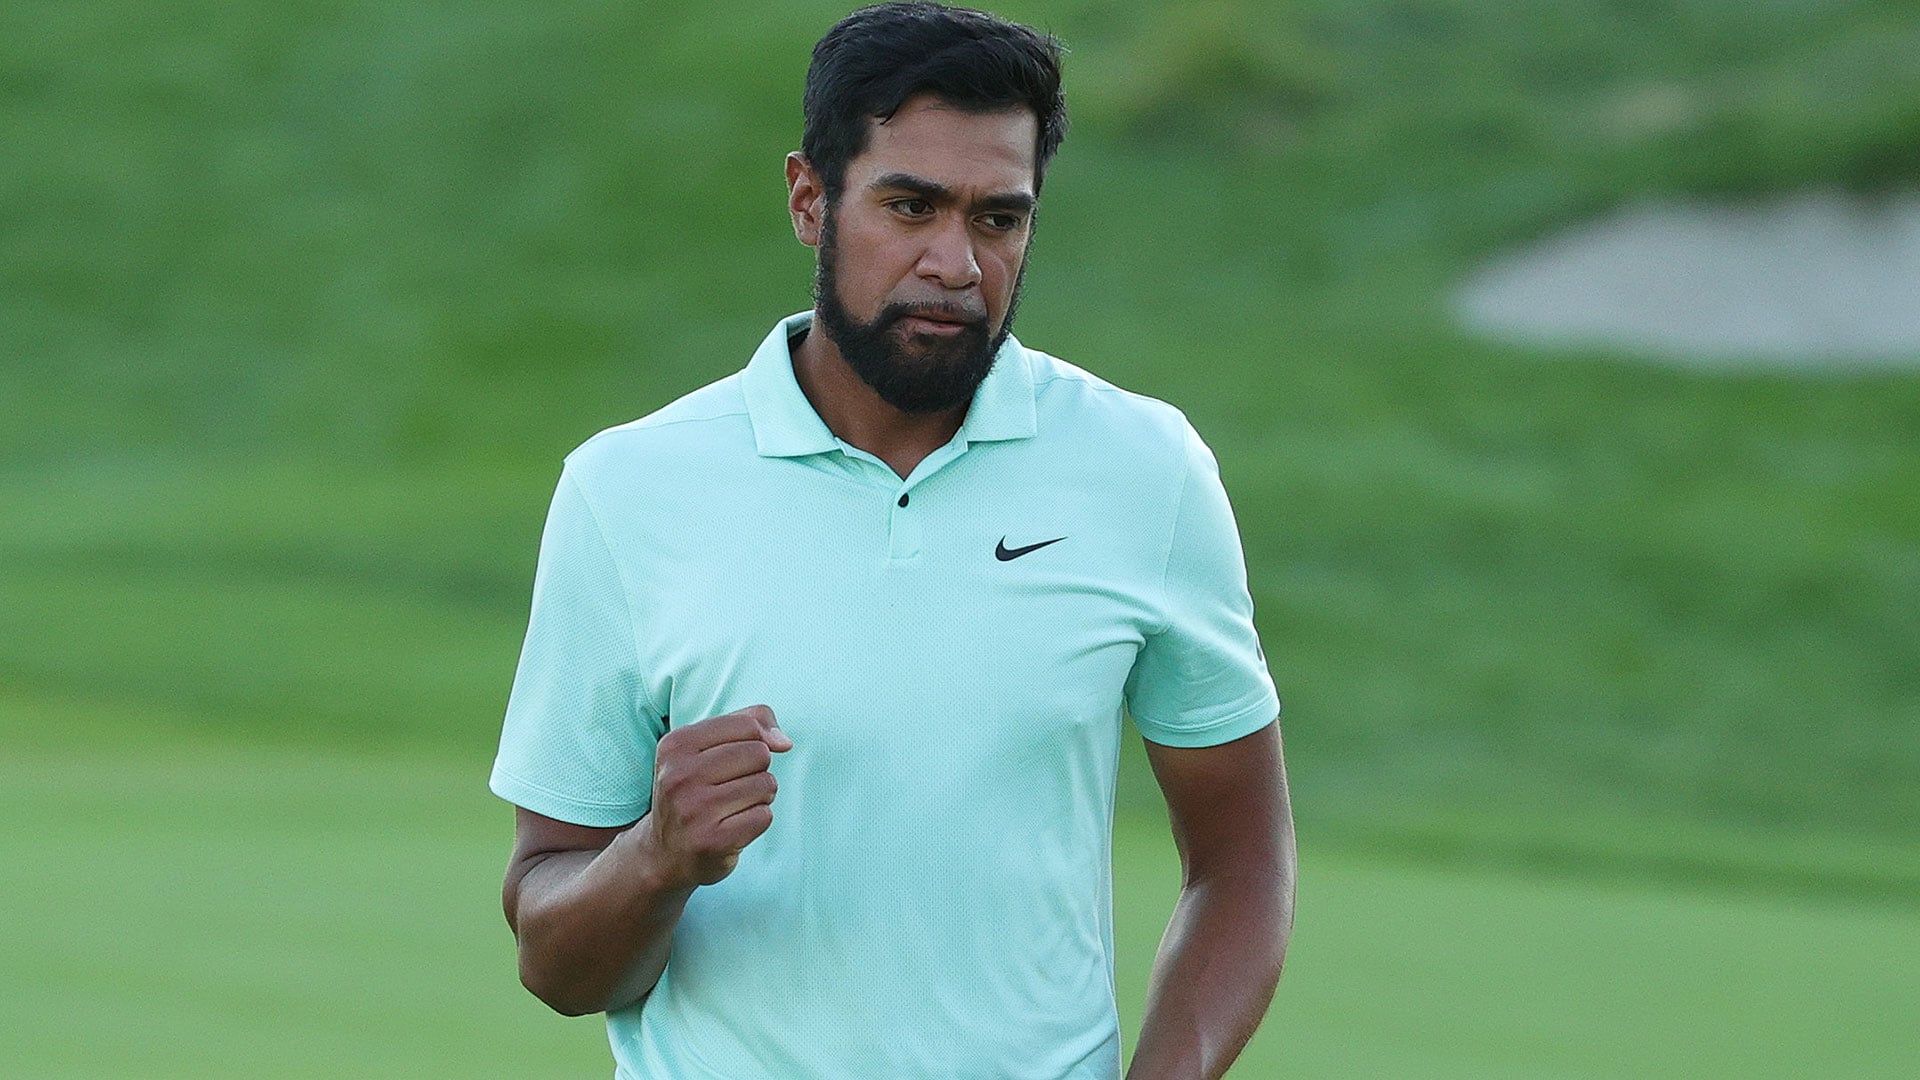 Tony Finau hits McDonald’s at 3 a.m. after playoff win – after dinner at Ruth’s Chris